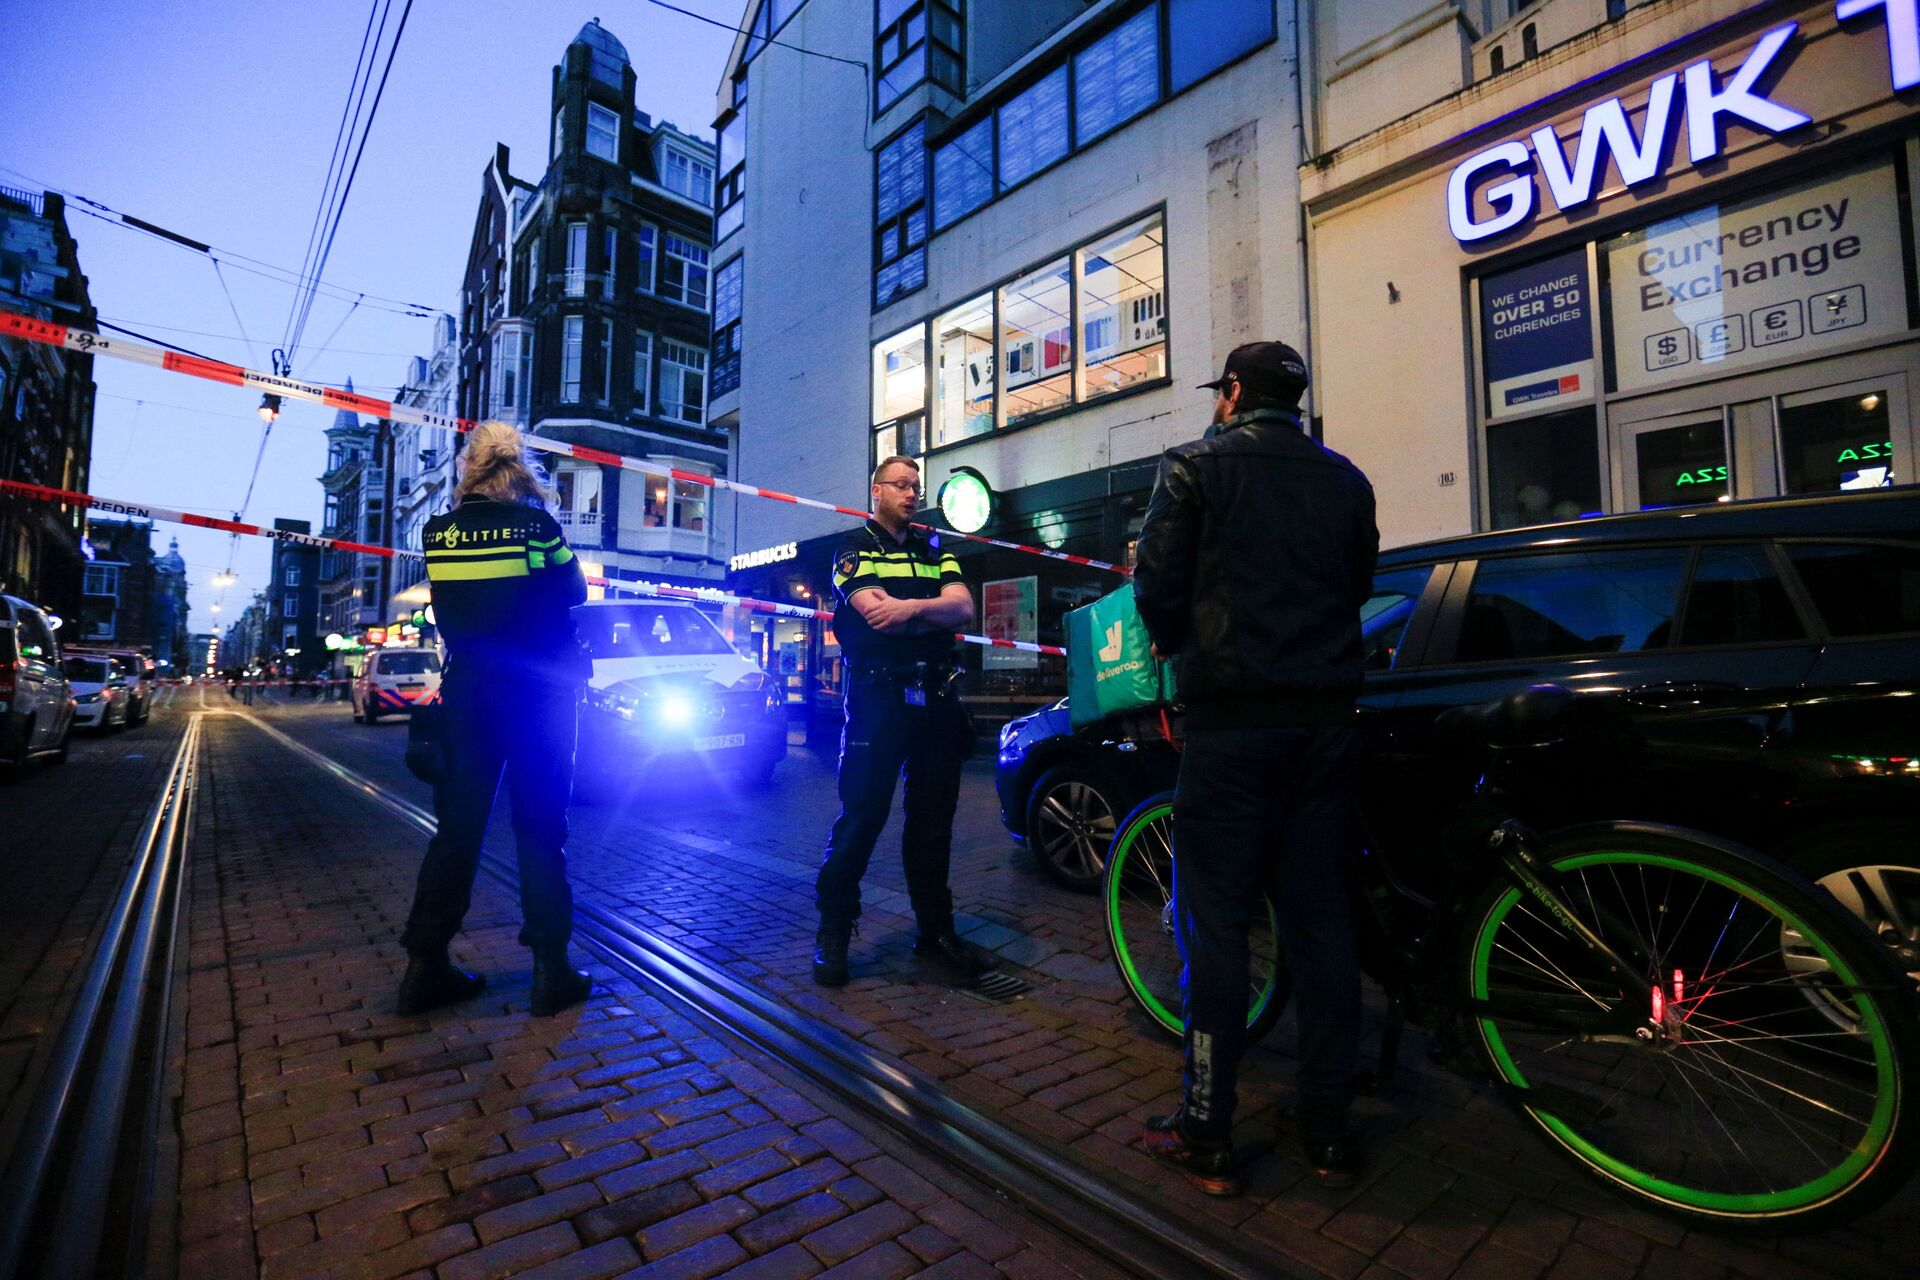 Police officers talk to a person as they stand guard in the area where Dutch celebrity crime reporter Peter R. de Vries, known for his reporting on some of the most renowned criminals in the Netherlands, was reportedly shot and seriously injured, in Amsterdam, Netherlands, July 6, 2021 - Sputnik International, 1920, 07.09.2021